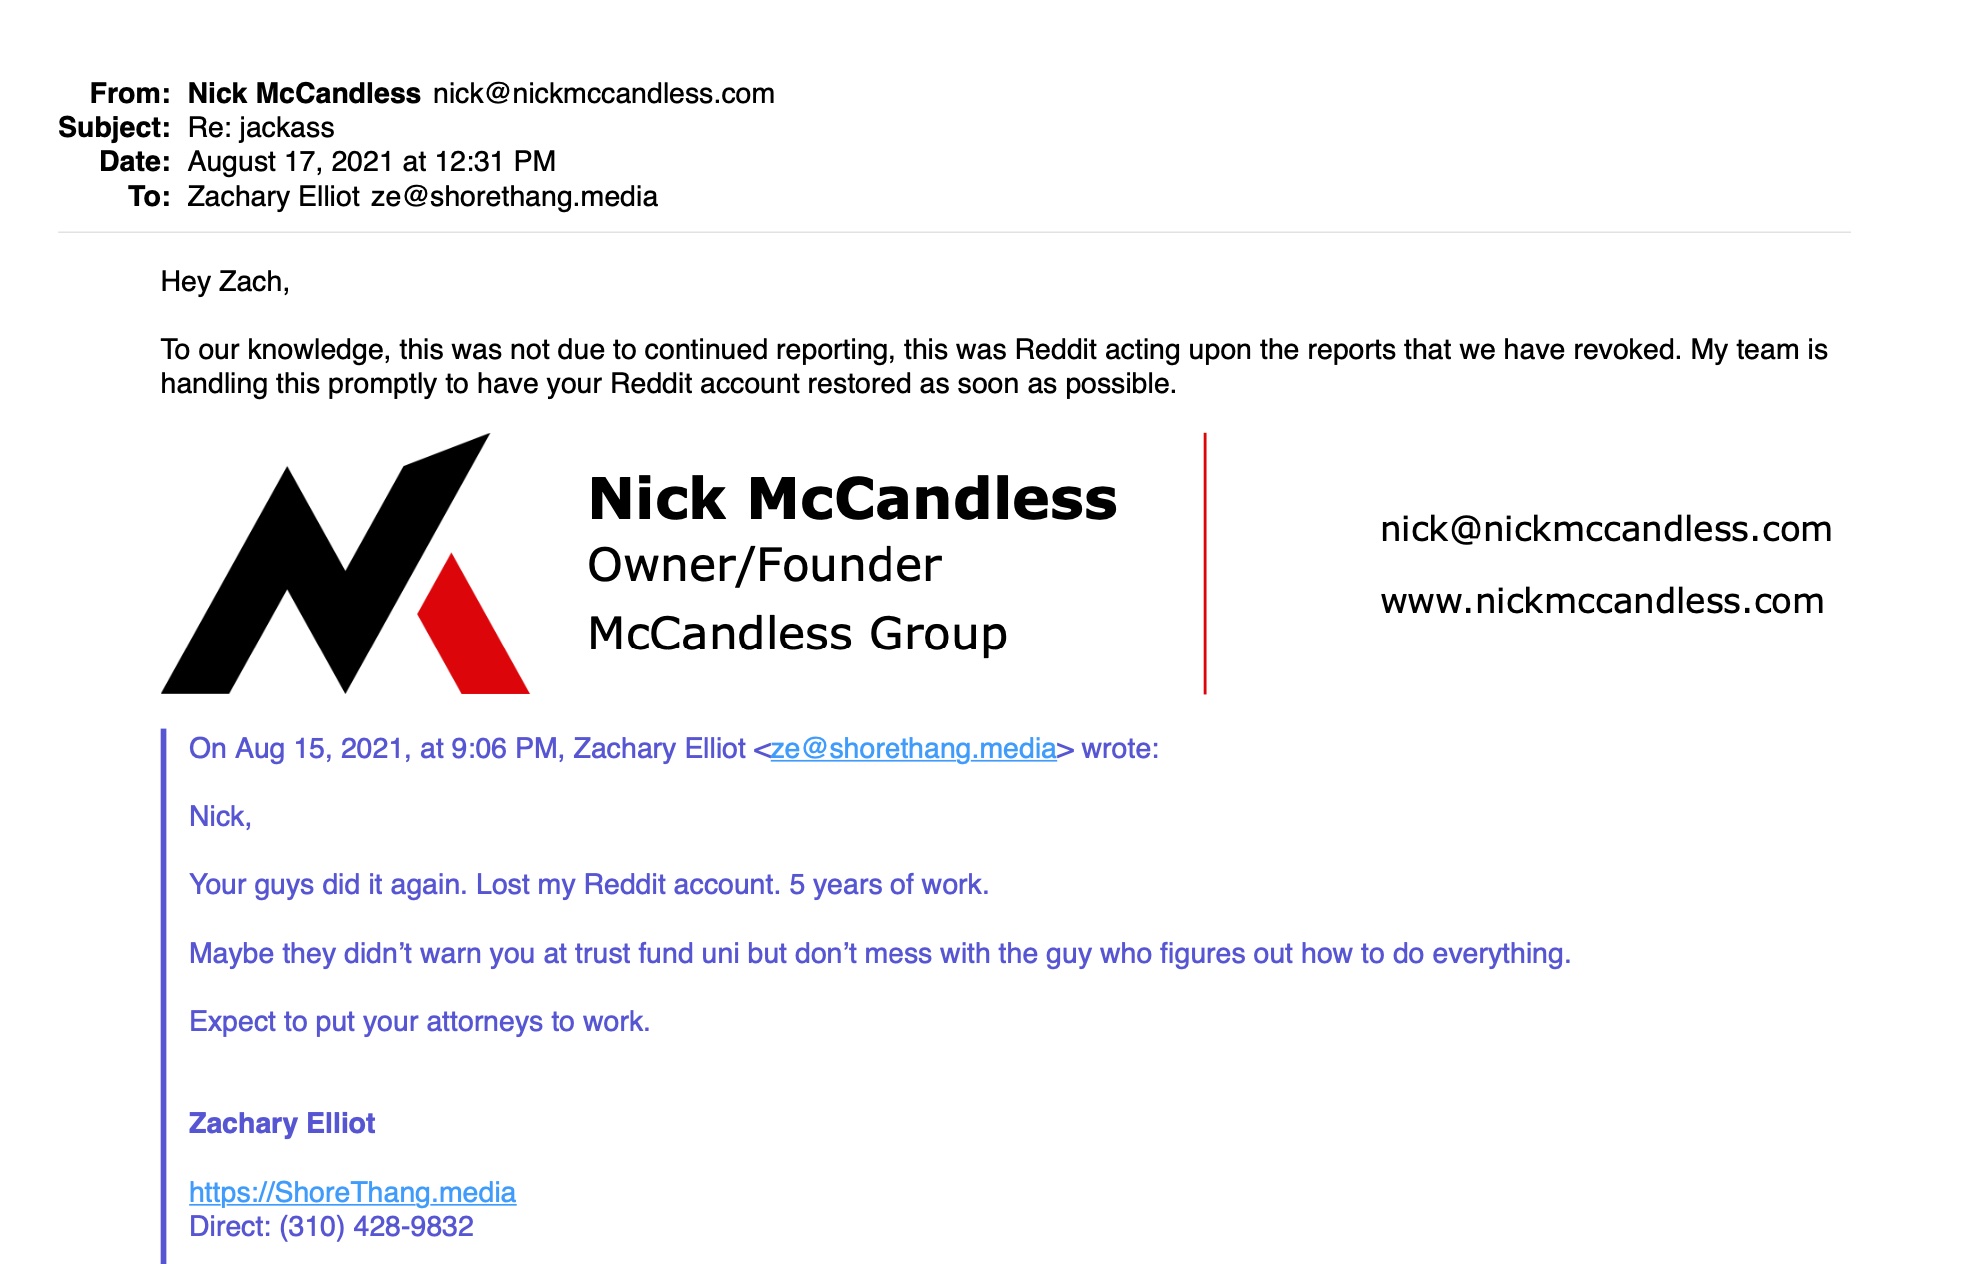 Nick McCandless admits to knocking down our Reddit account using false DMCAs